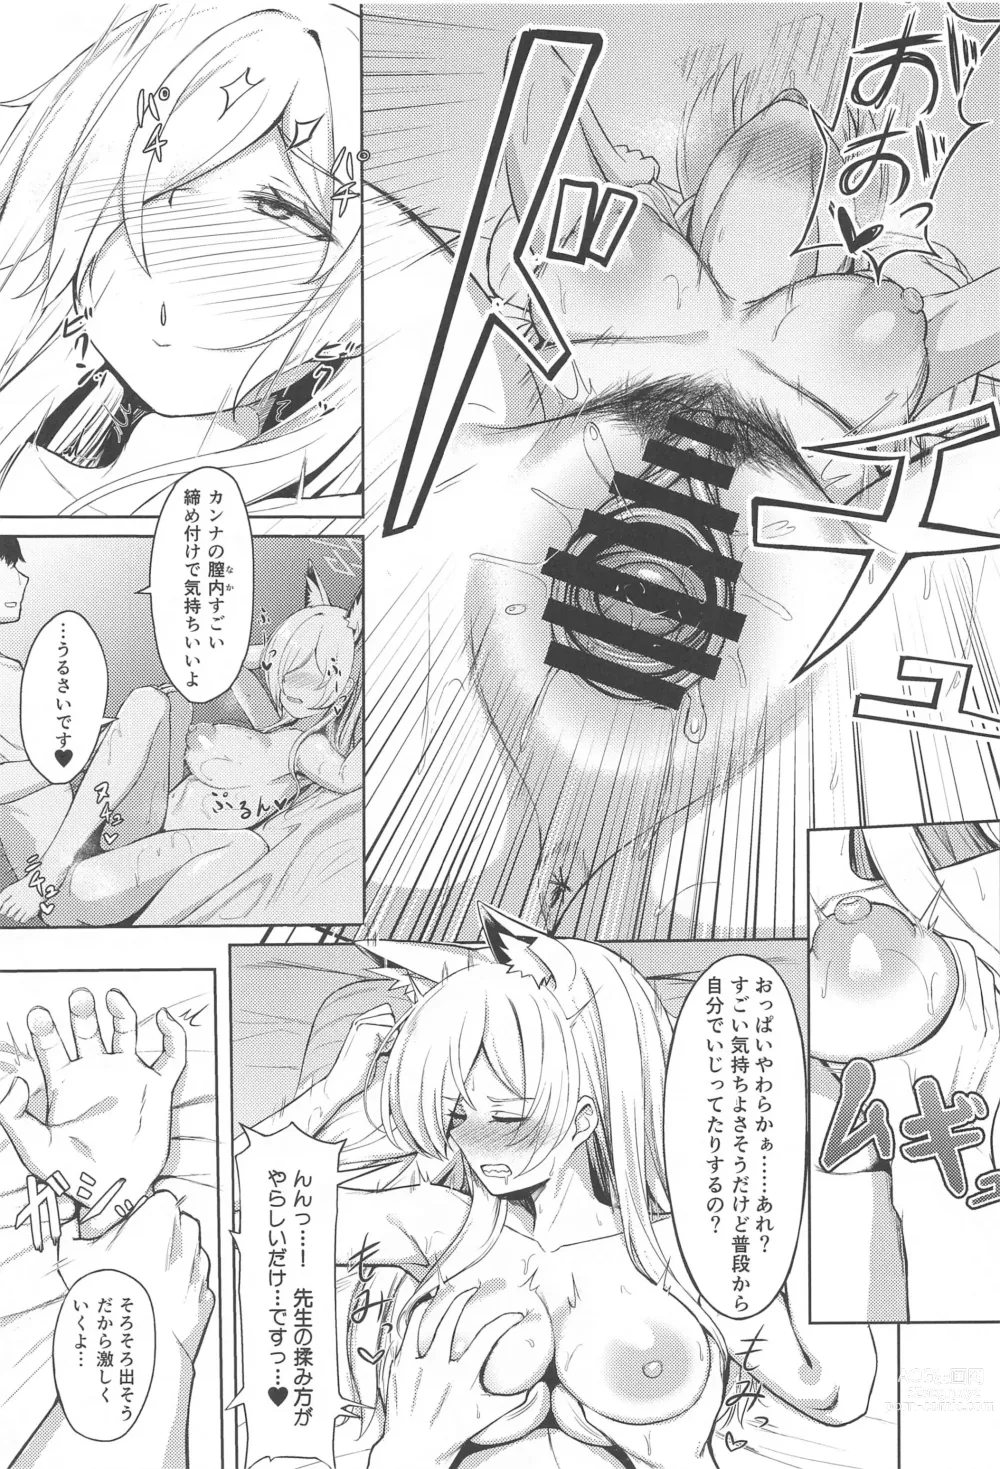 Page 10 of doujinshi Crazy Frenzy